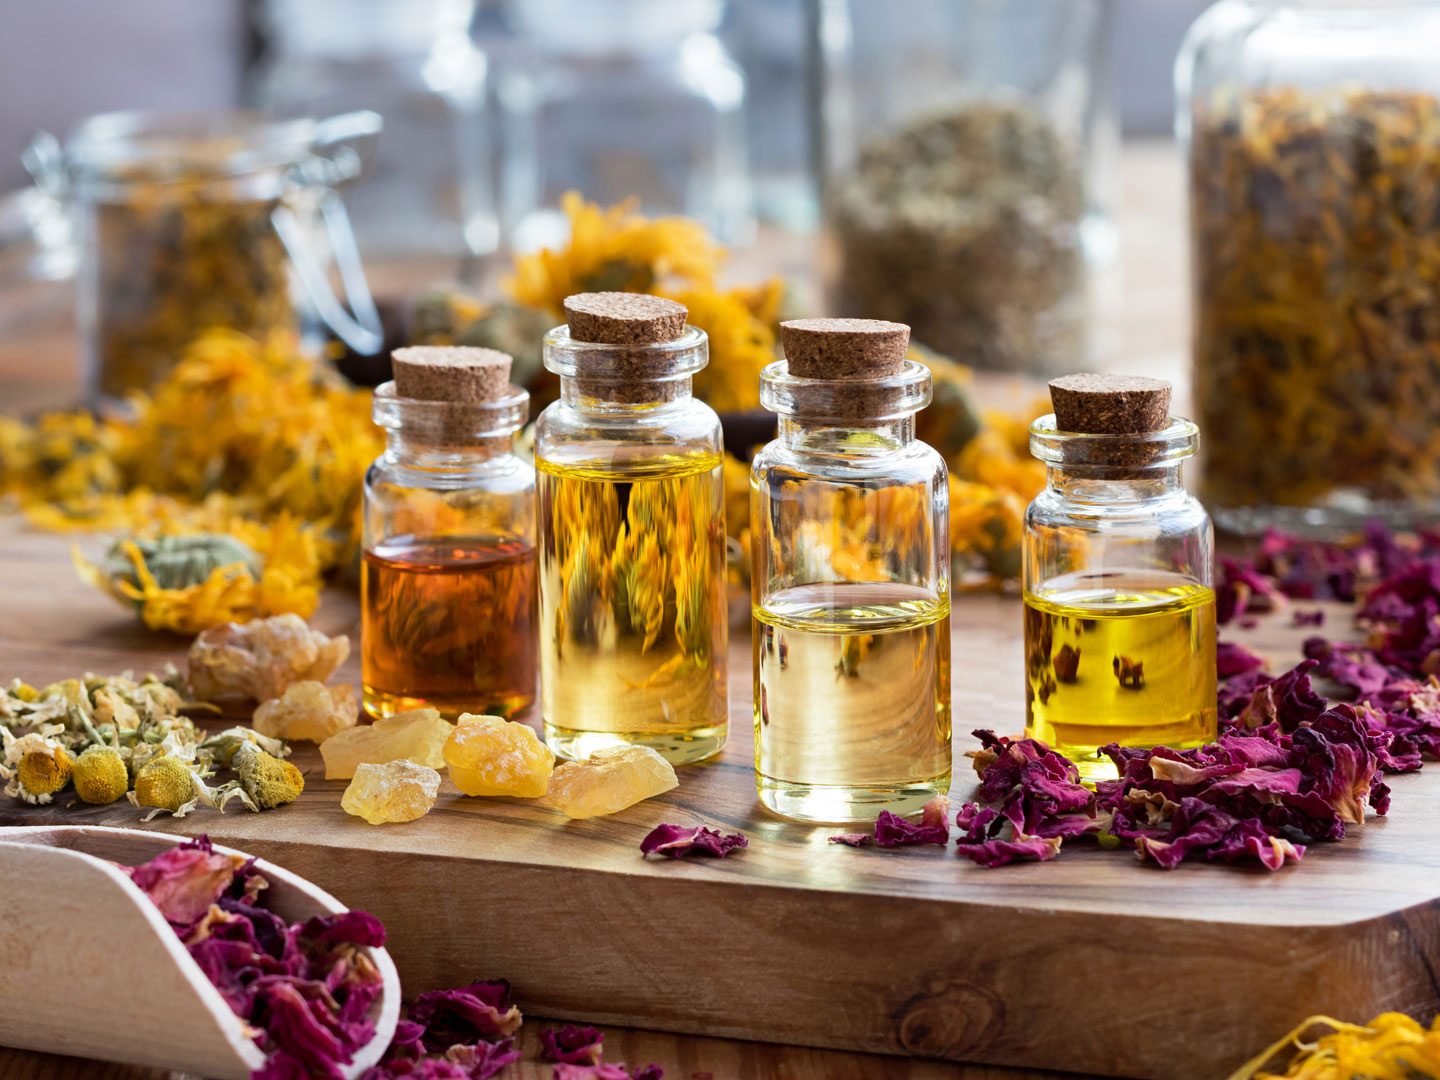 Dr. Weil's Guide To Essential Oils, Healthy Living